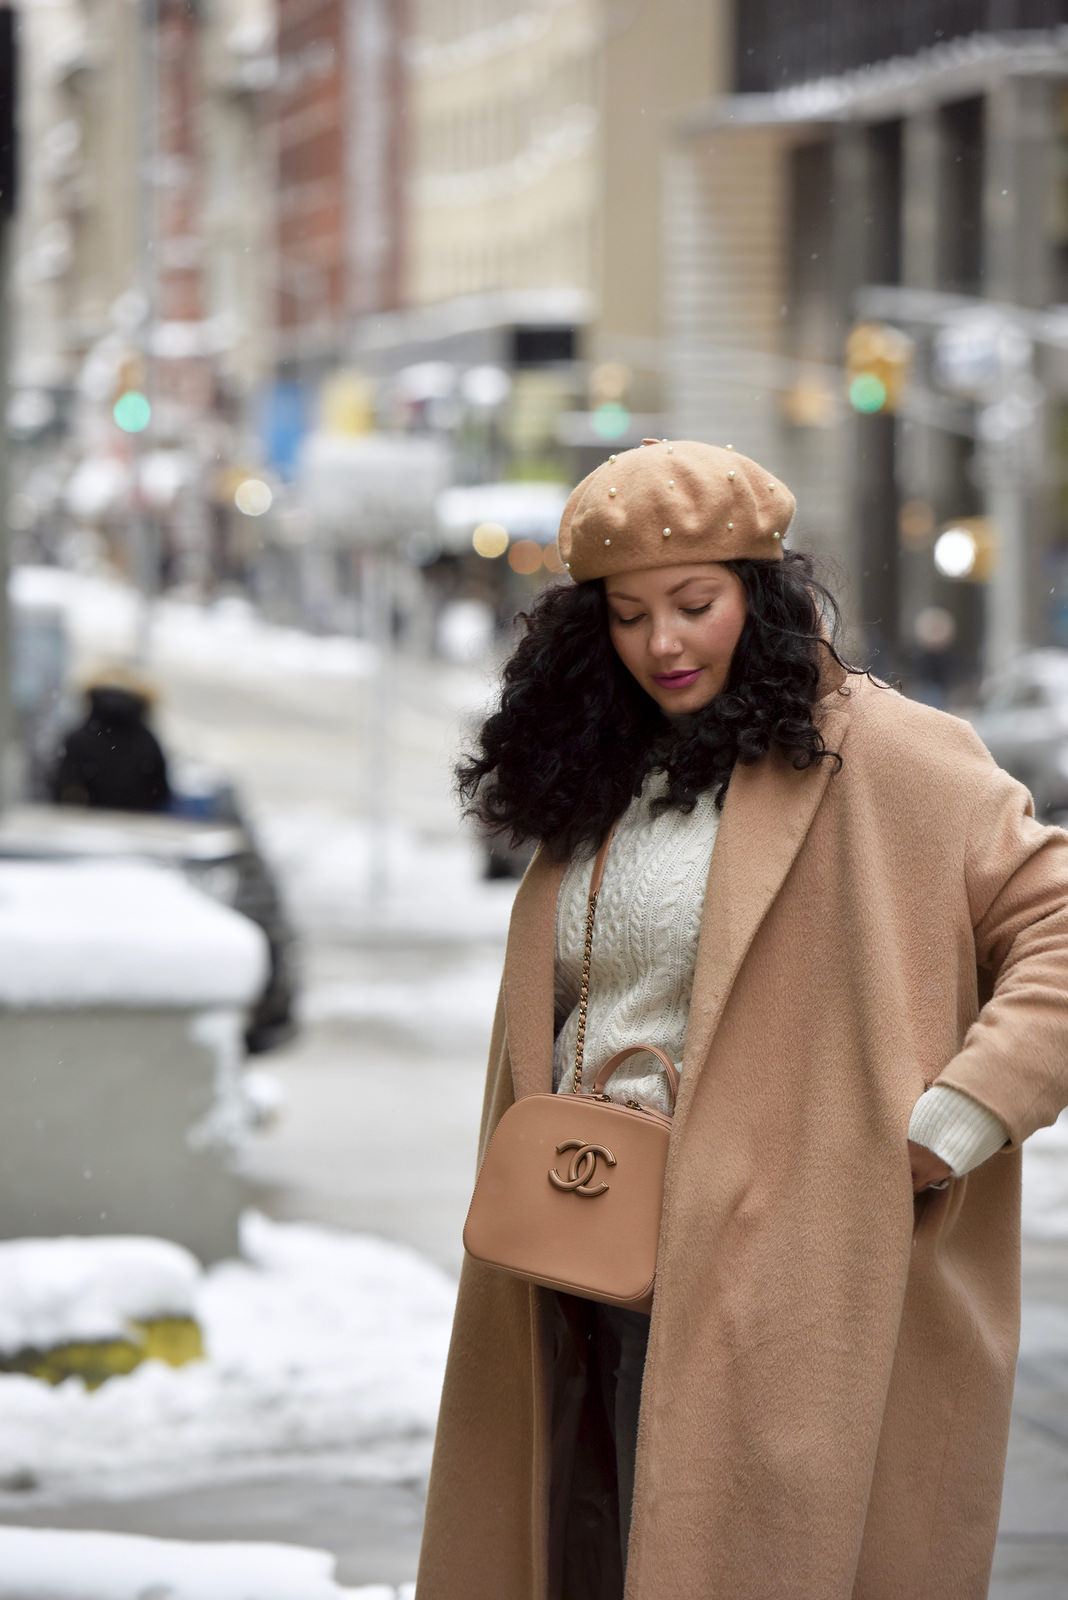 Girl with Curves featuring a pearl beret from nordstorm, camel coat from Asos, cream sweater from Asos, lipstick from sephora, and handbag from chanel